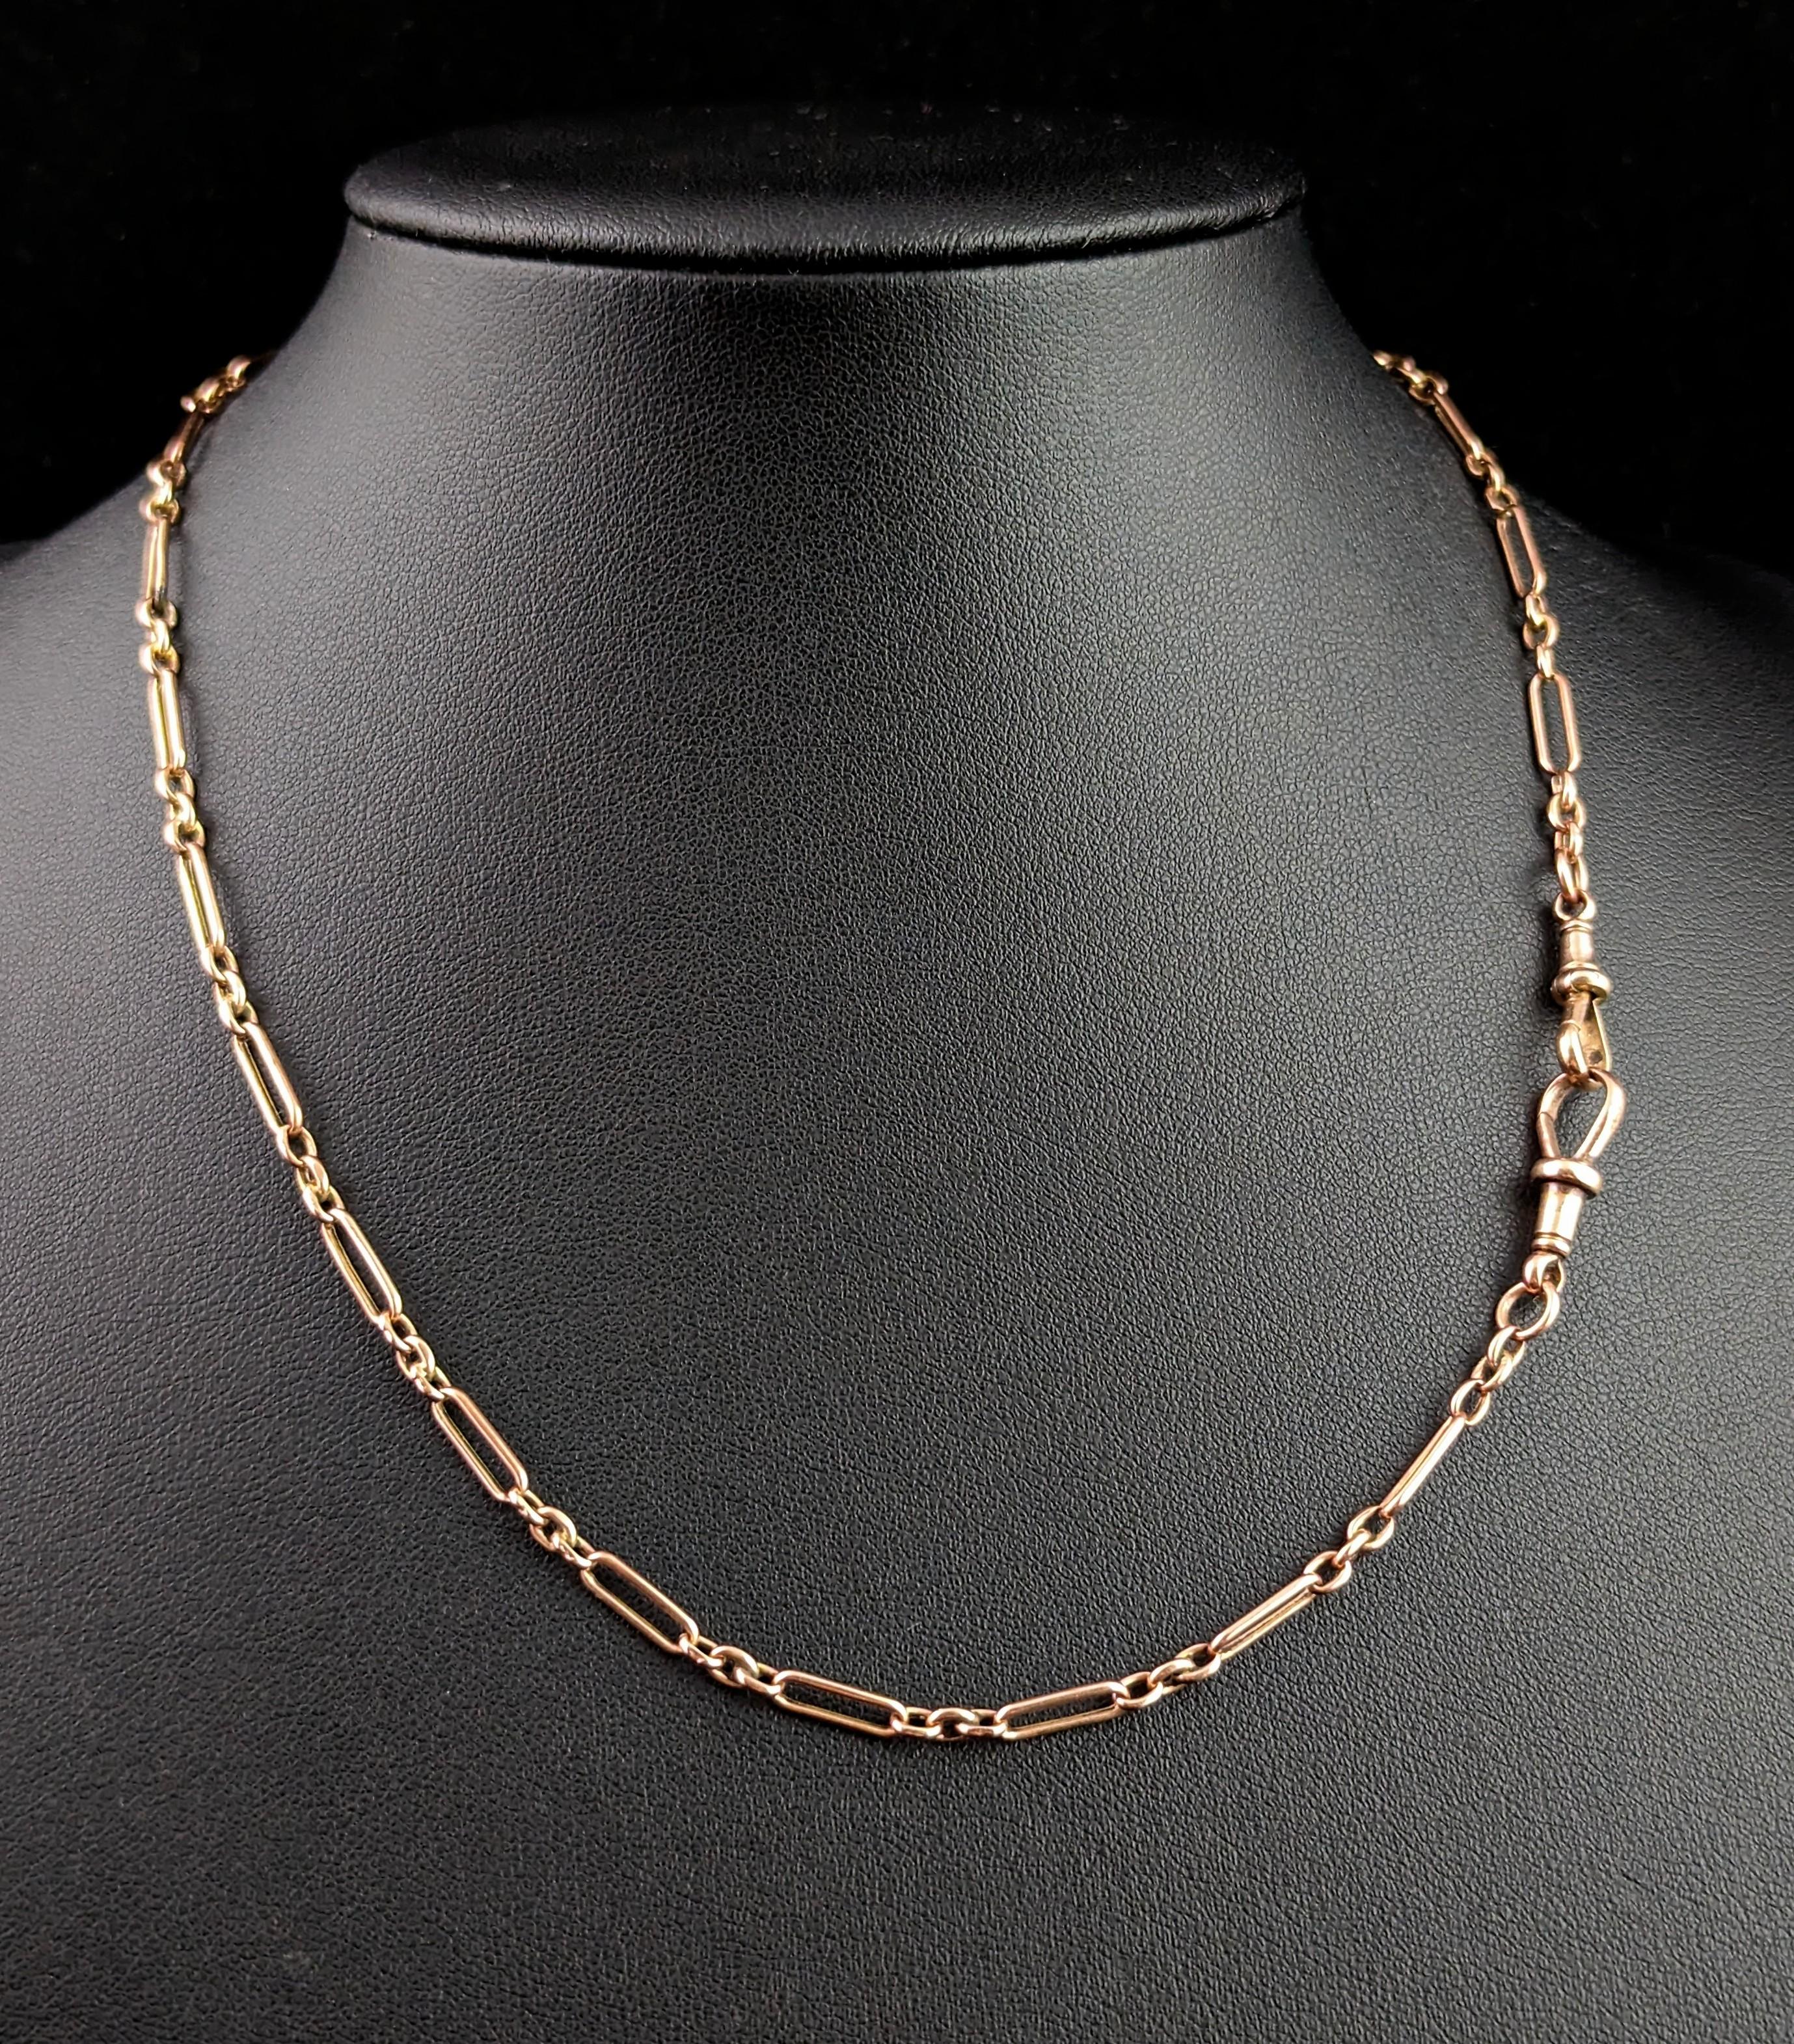 If you are a fan of antique Albert chains then this piece is for you!

This 9kt rose gold Albert chain is a good wearable length and has slimmer links so would be perfect for pendants or wearing as part of a chain stack!

This beautiful chain has